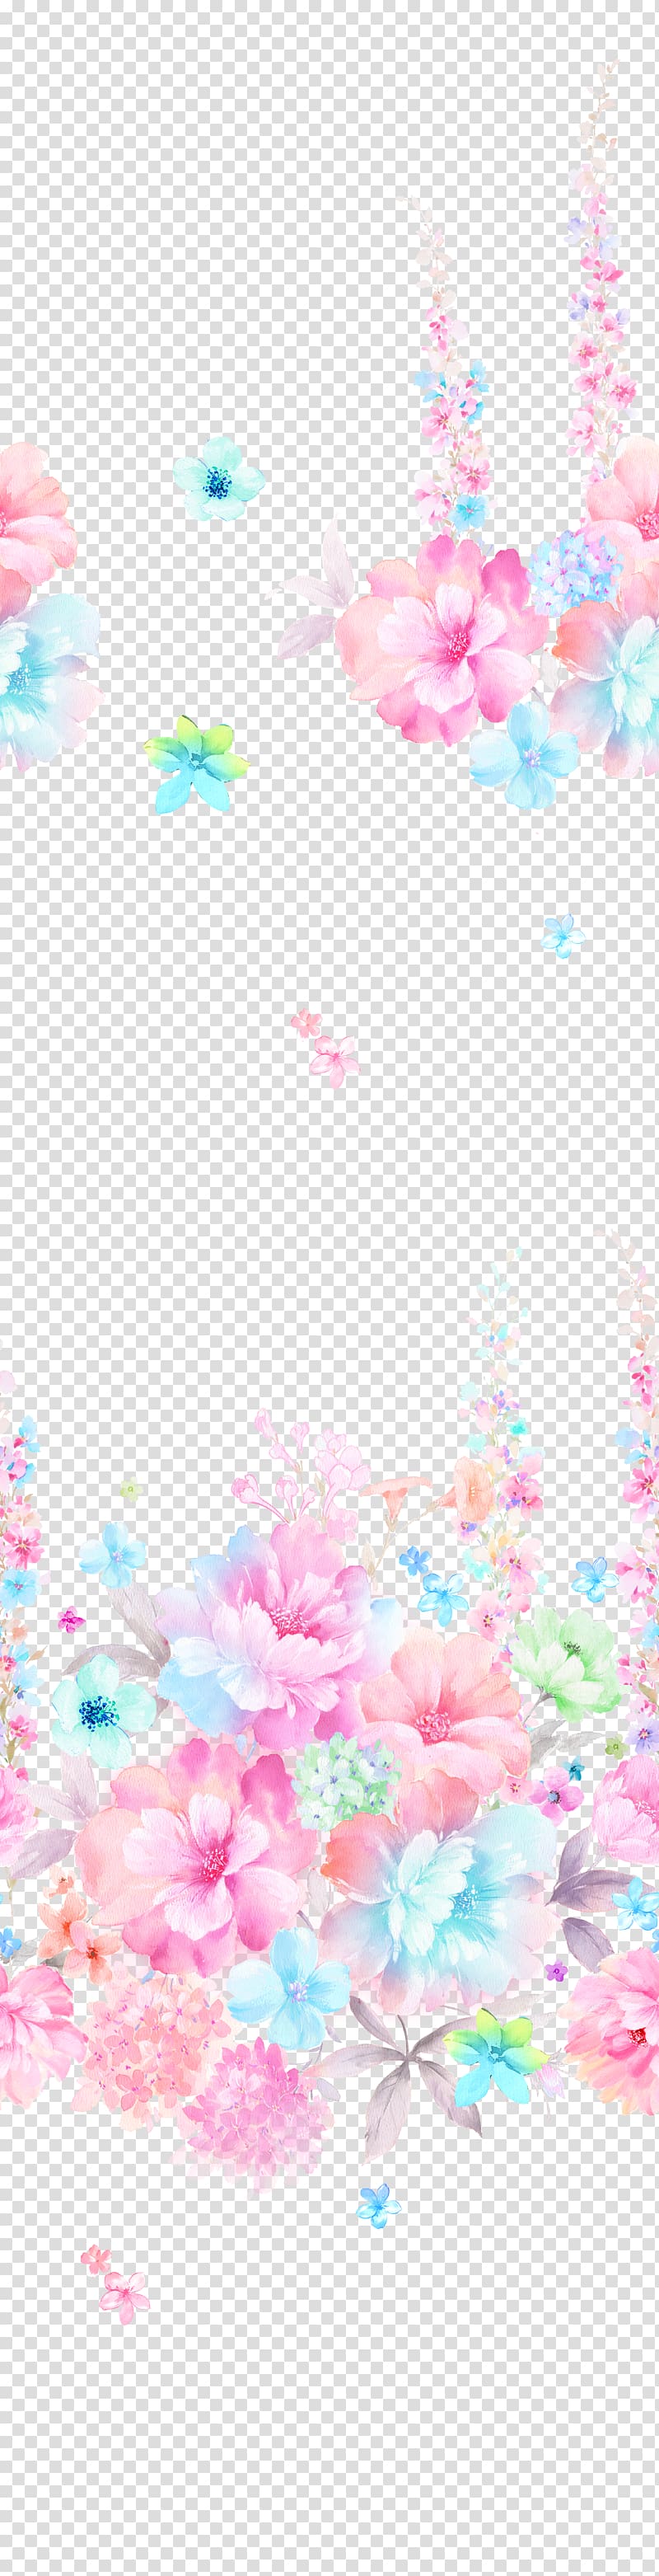 Painting Flowers Watercolor painting Graphic design, Watercolor flowers, floral background transparent background PNG clipart